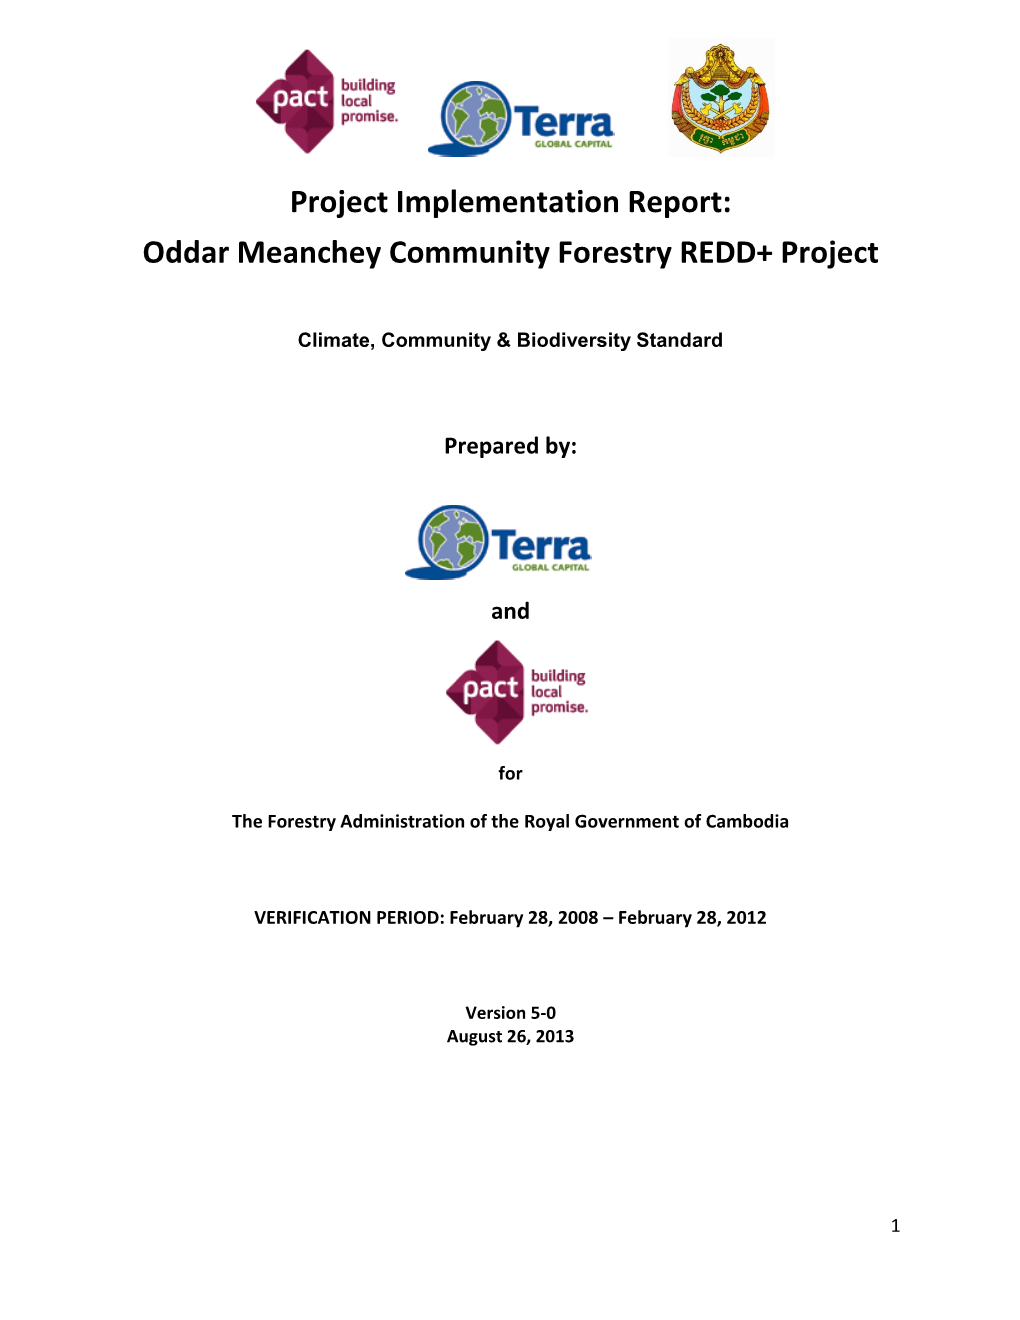 Project Implementation Report: Oddar Meanchey Community Forestry REDD+ Project